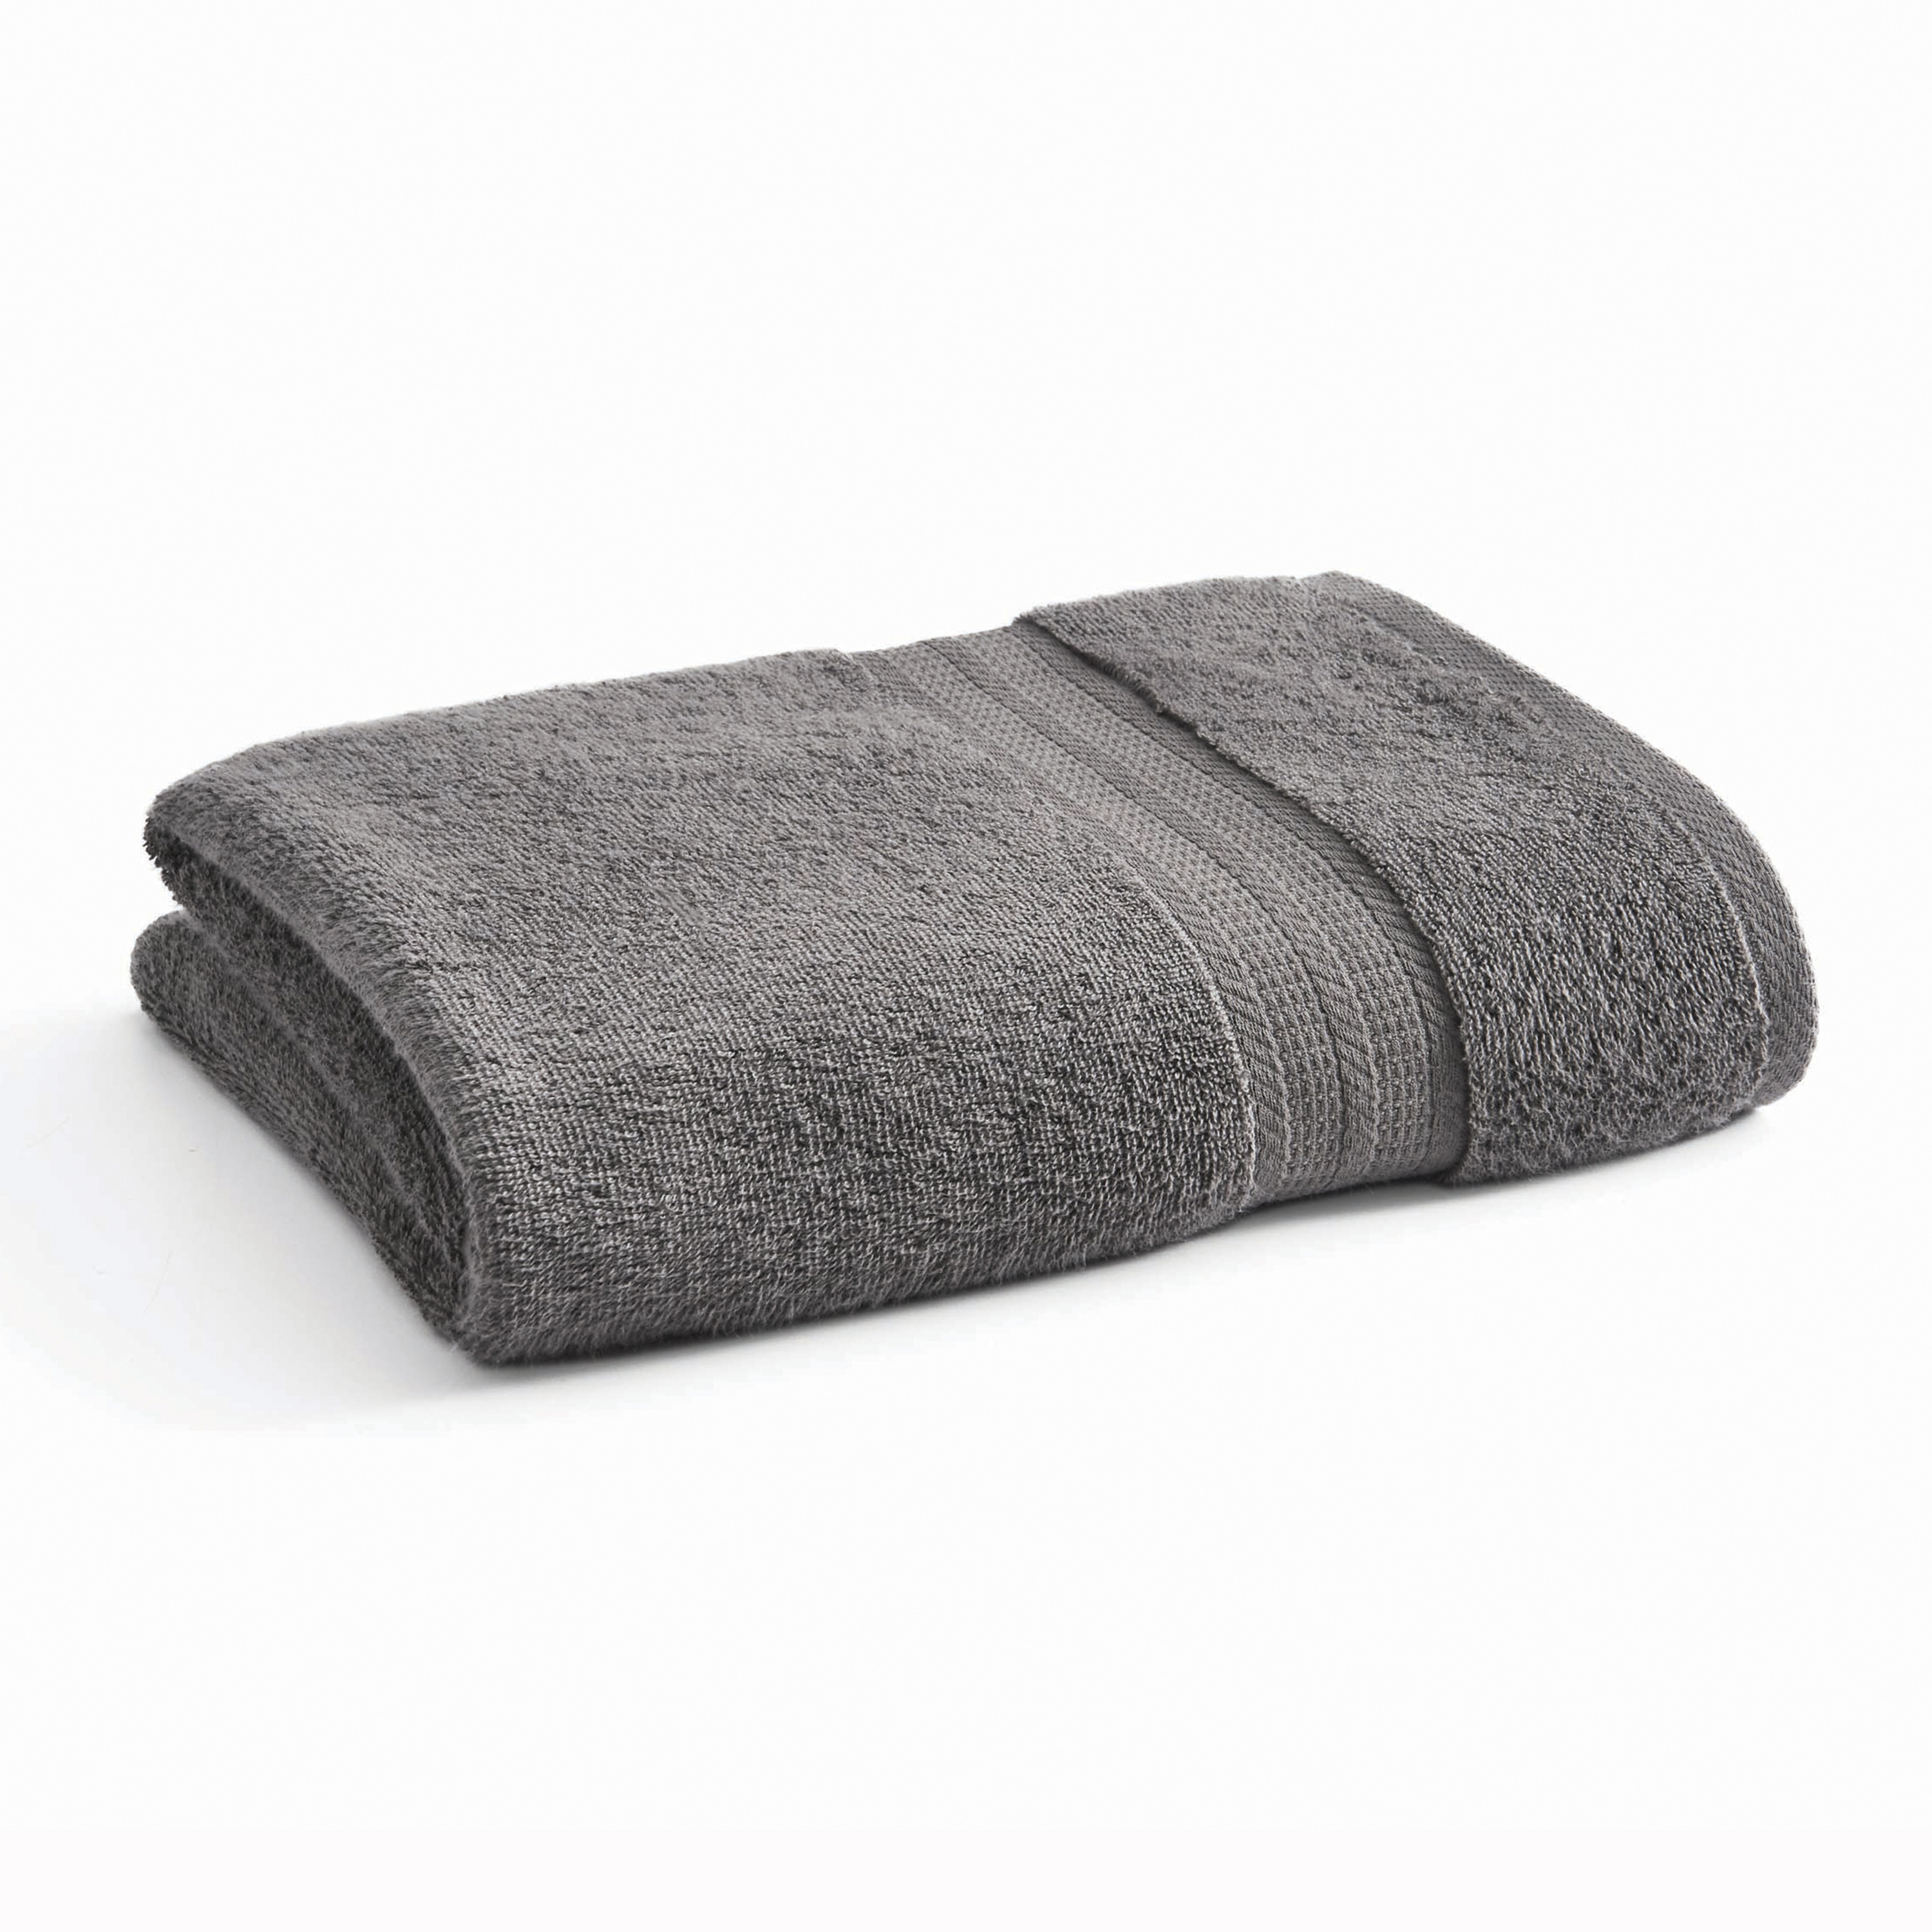 Better Homes & Gardens Adult Bath Towel, Solid Grey - image 1 of 9